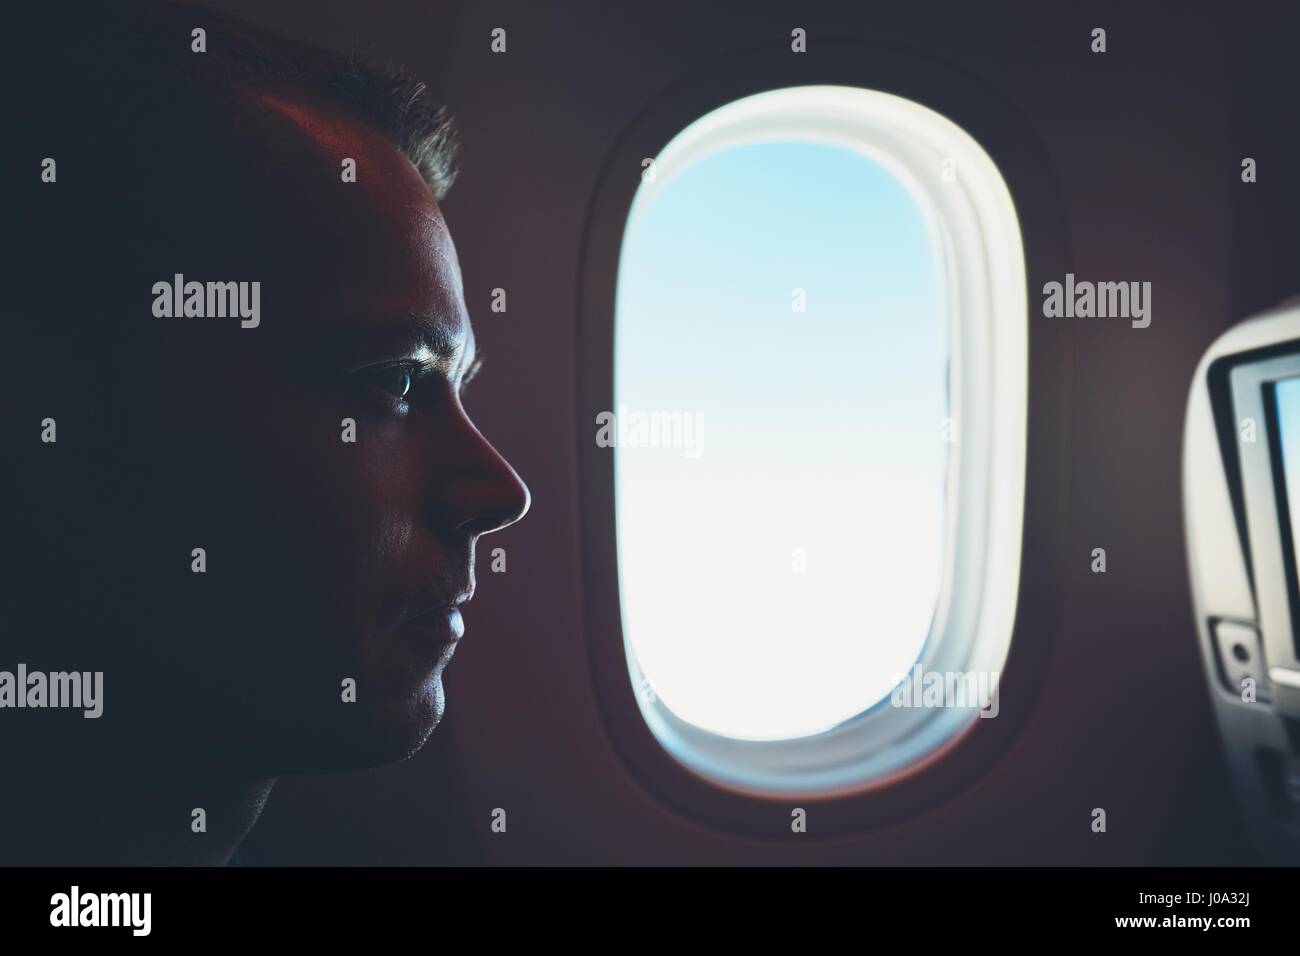 Comfortable traveling by airplane. Silhouette of the passenger enjoying his journey inside an airplane. Stock Photo